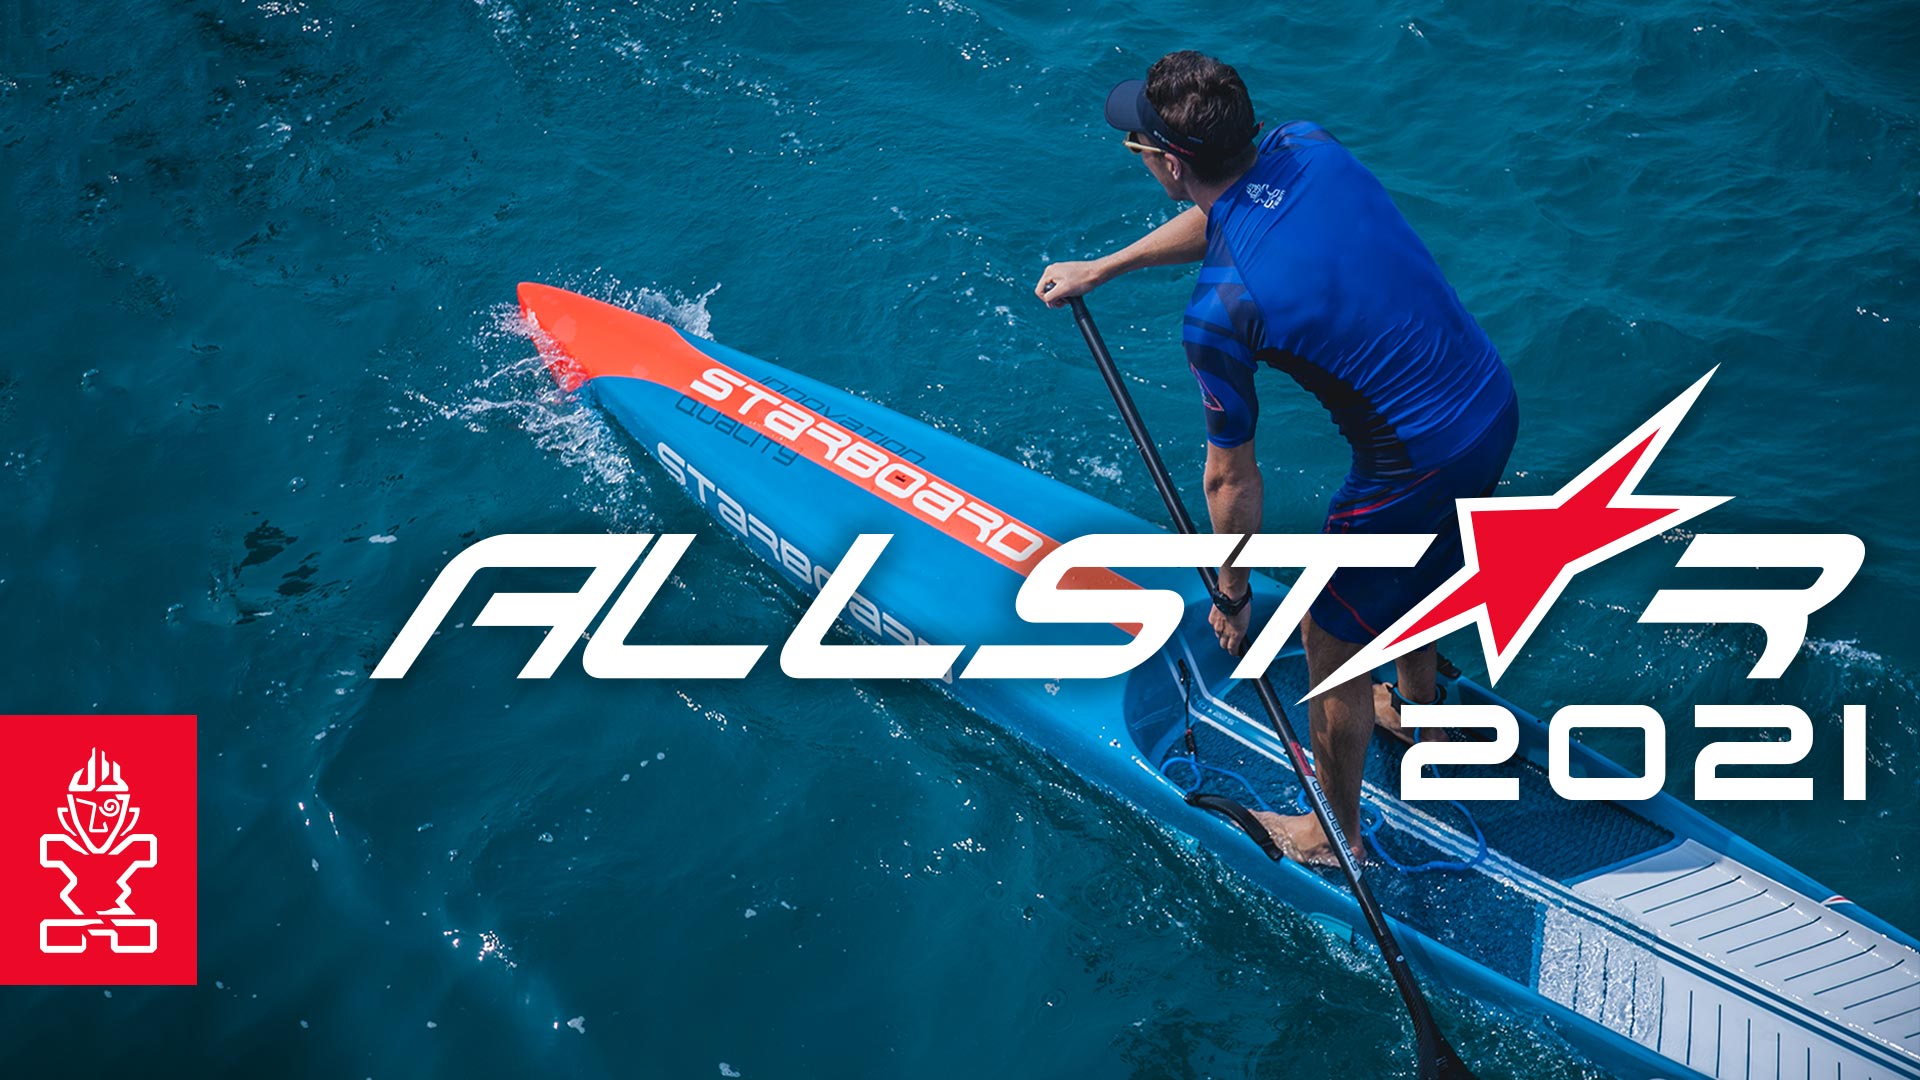 2021 All Star » Starboard SUP